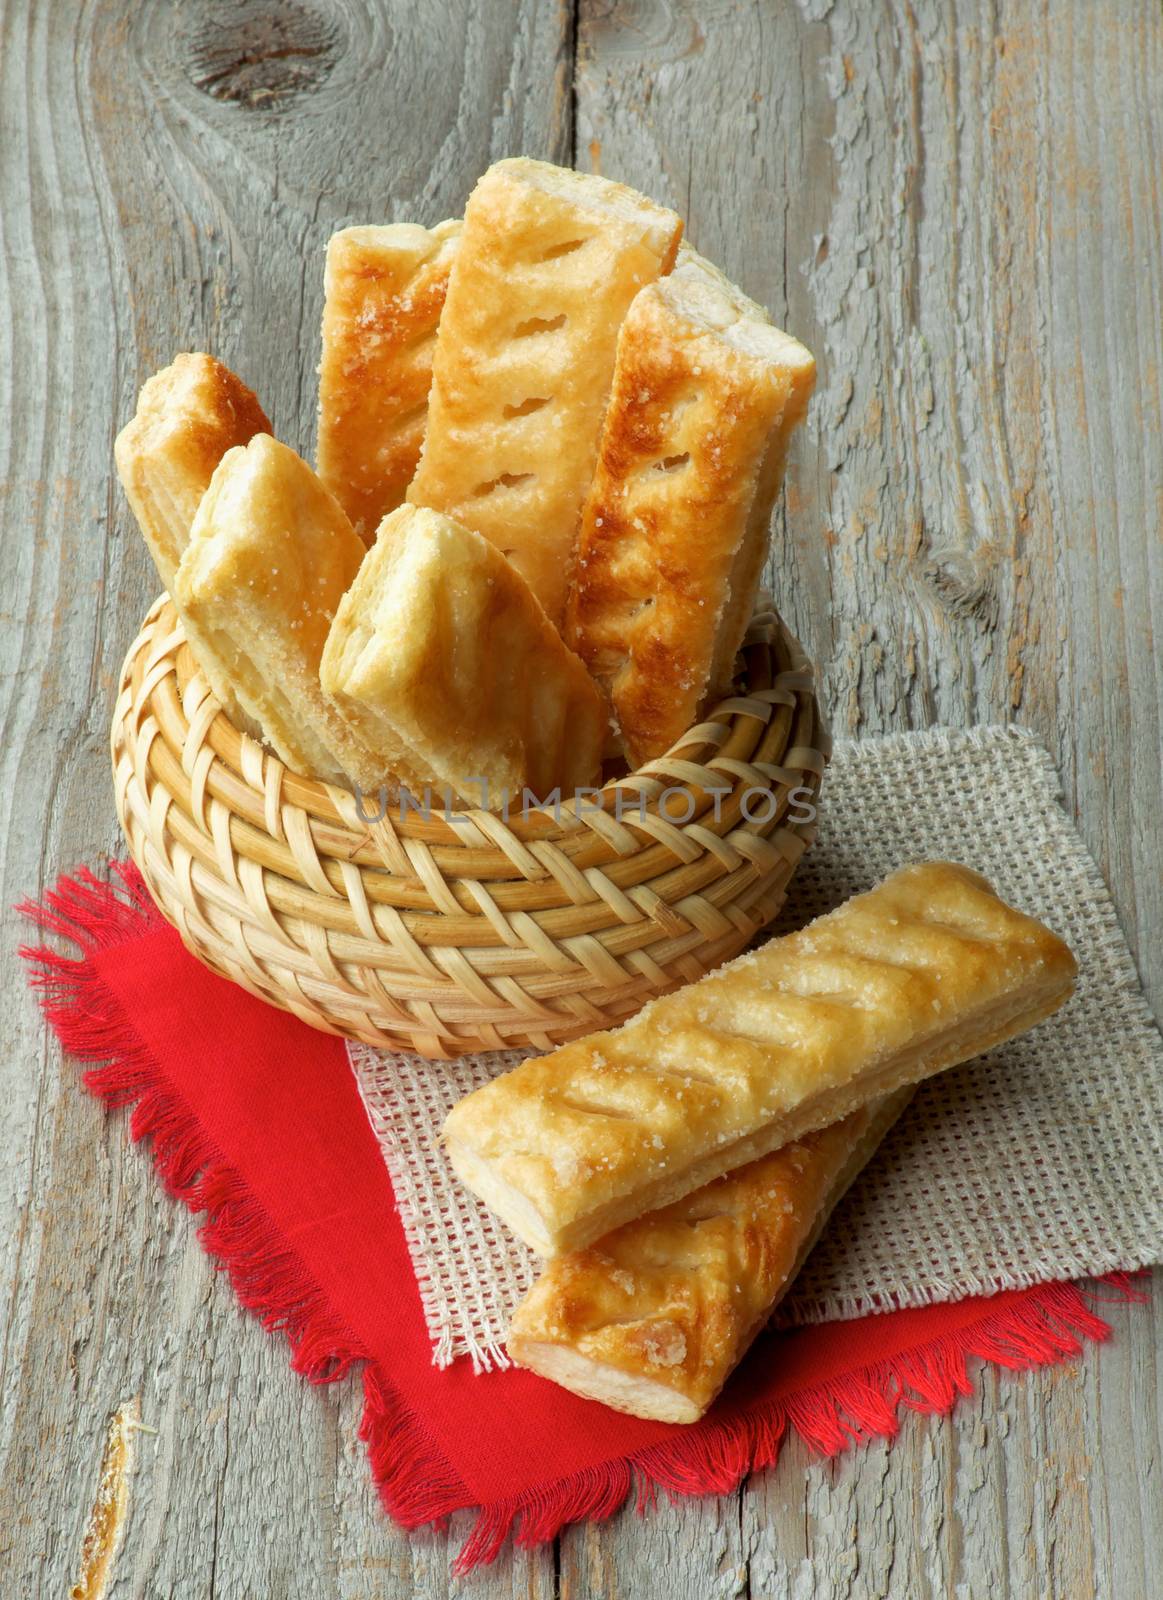 Puff Pastry Sticks Sprinkled with Sugar Crystals in Wicker Bowl and Napkins closeup on Wooden background